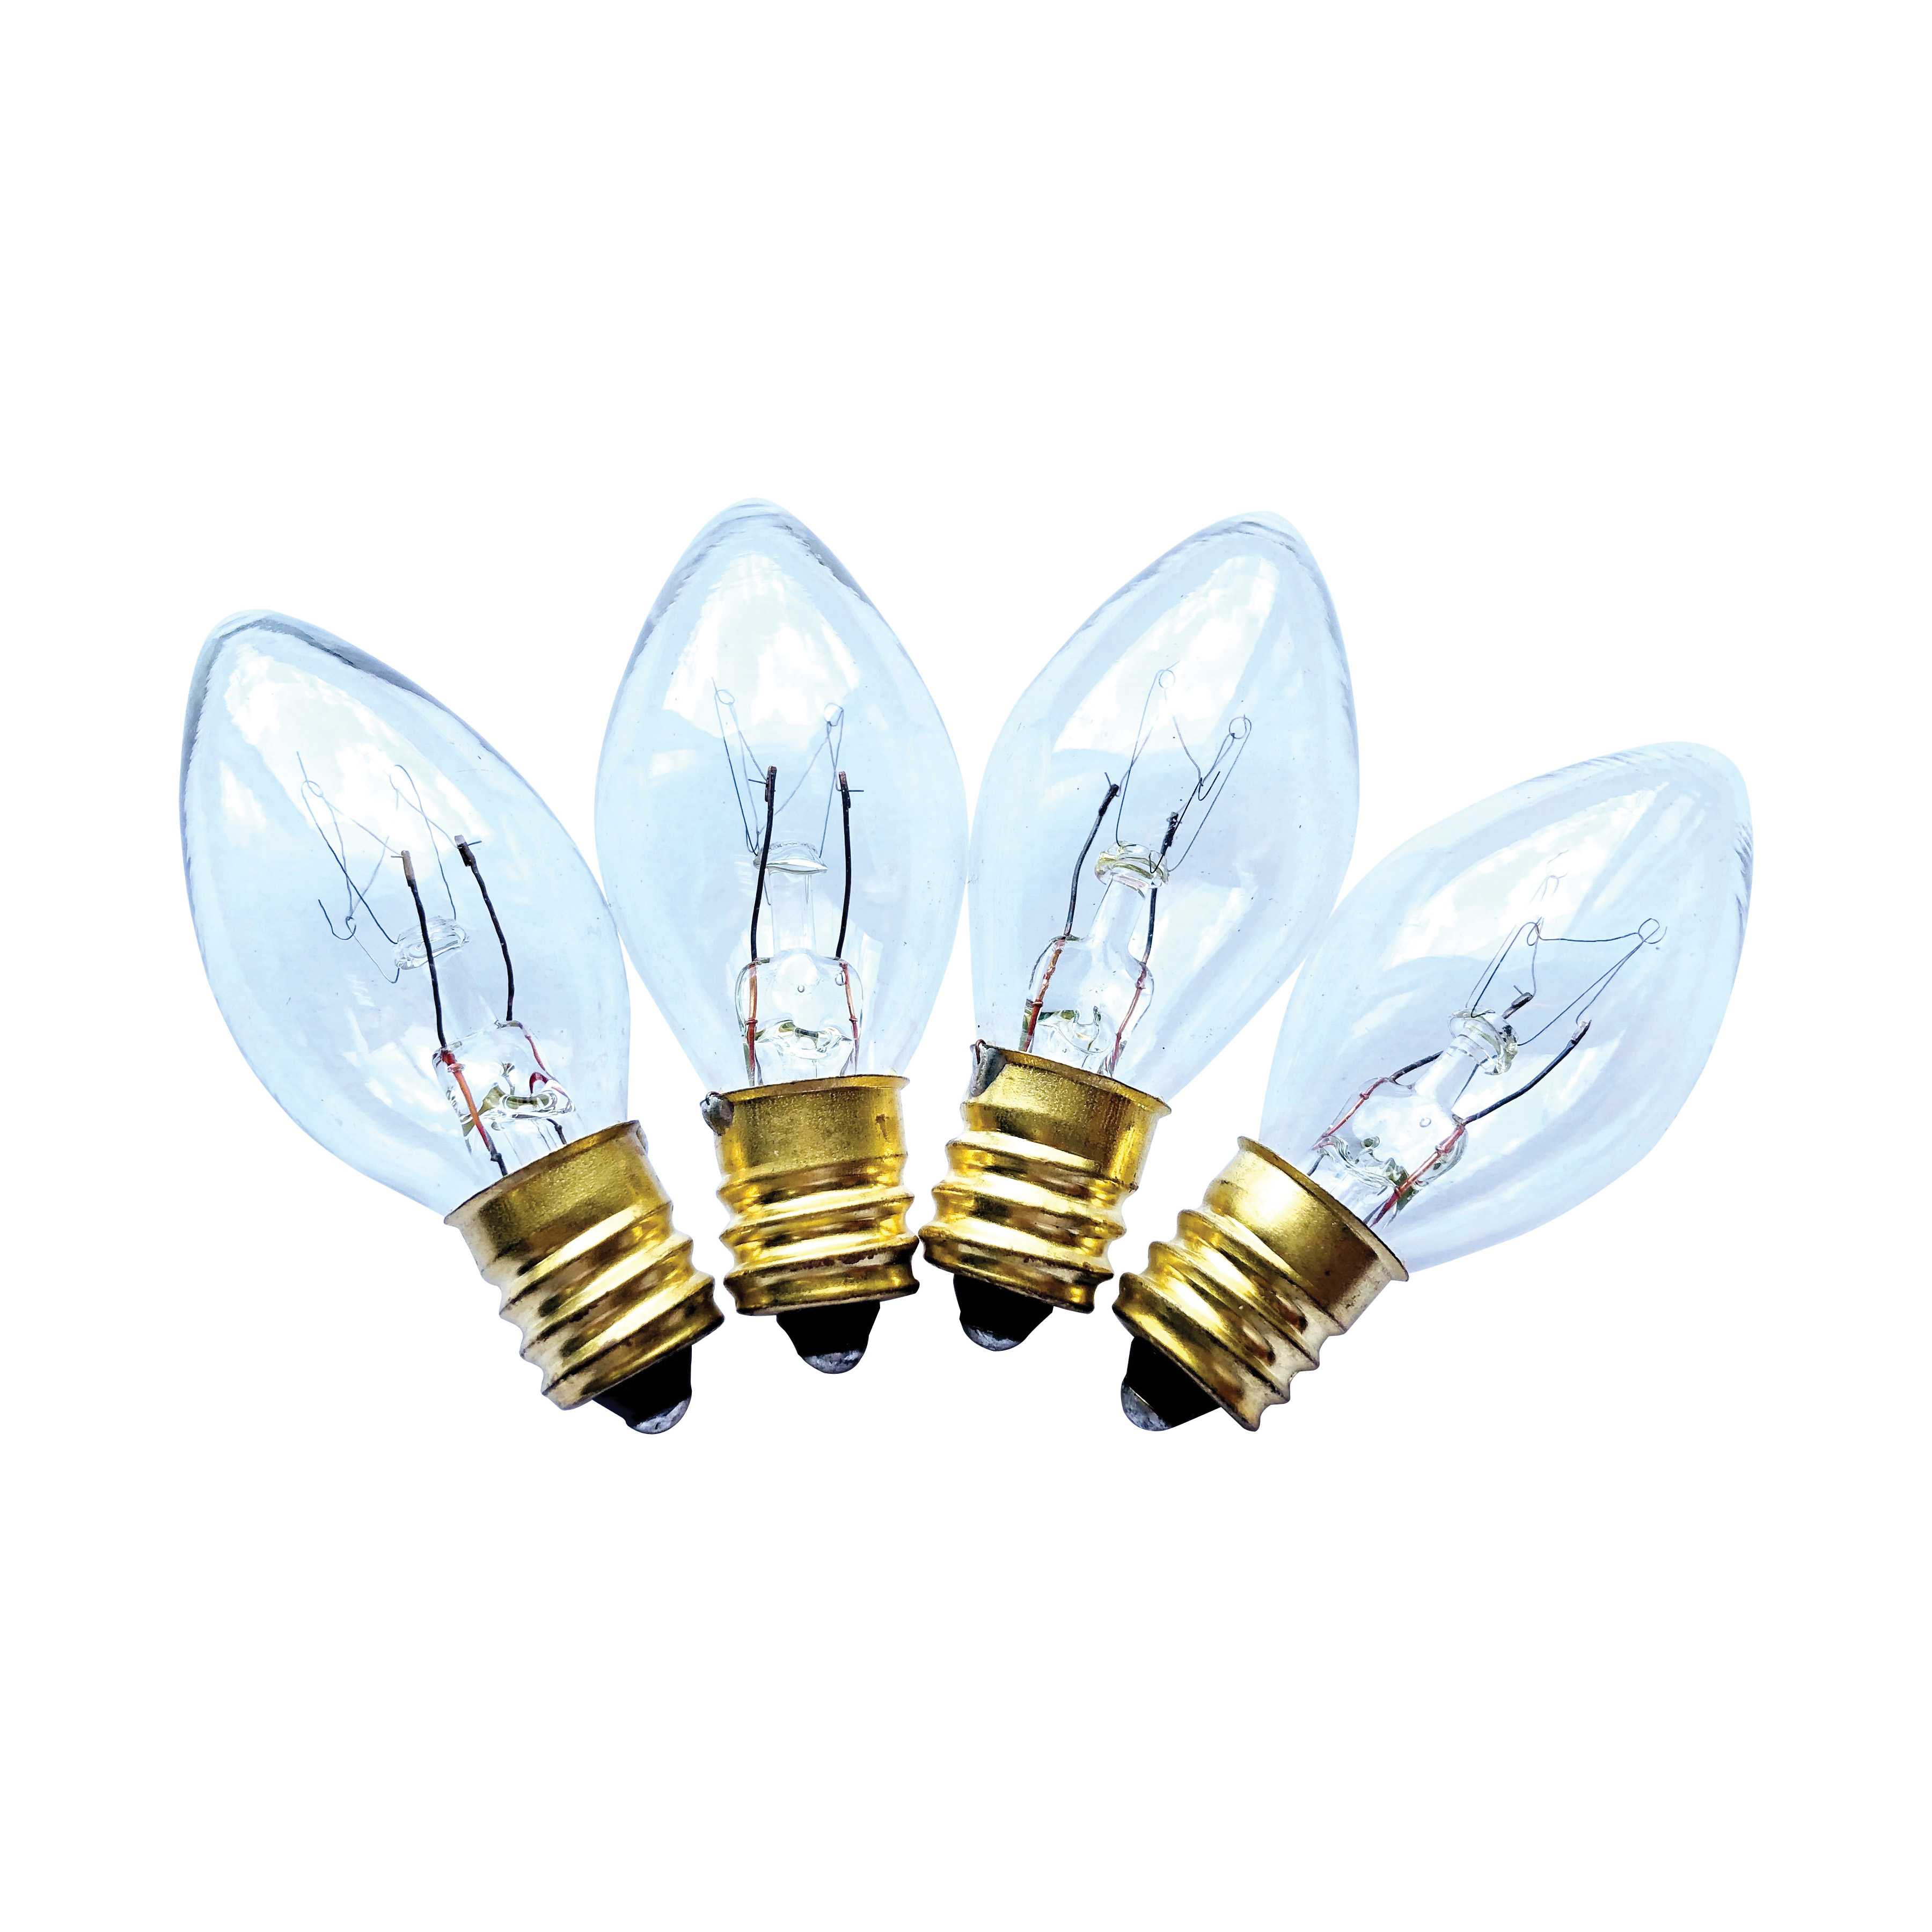 16291 Replacement Bulb, 5 W, Candelabra Lamp Base, Incandescent Lamp, Clear Light